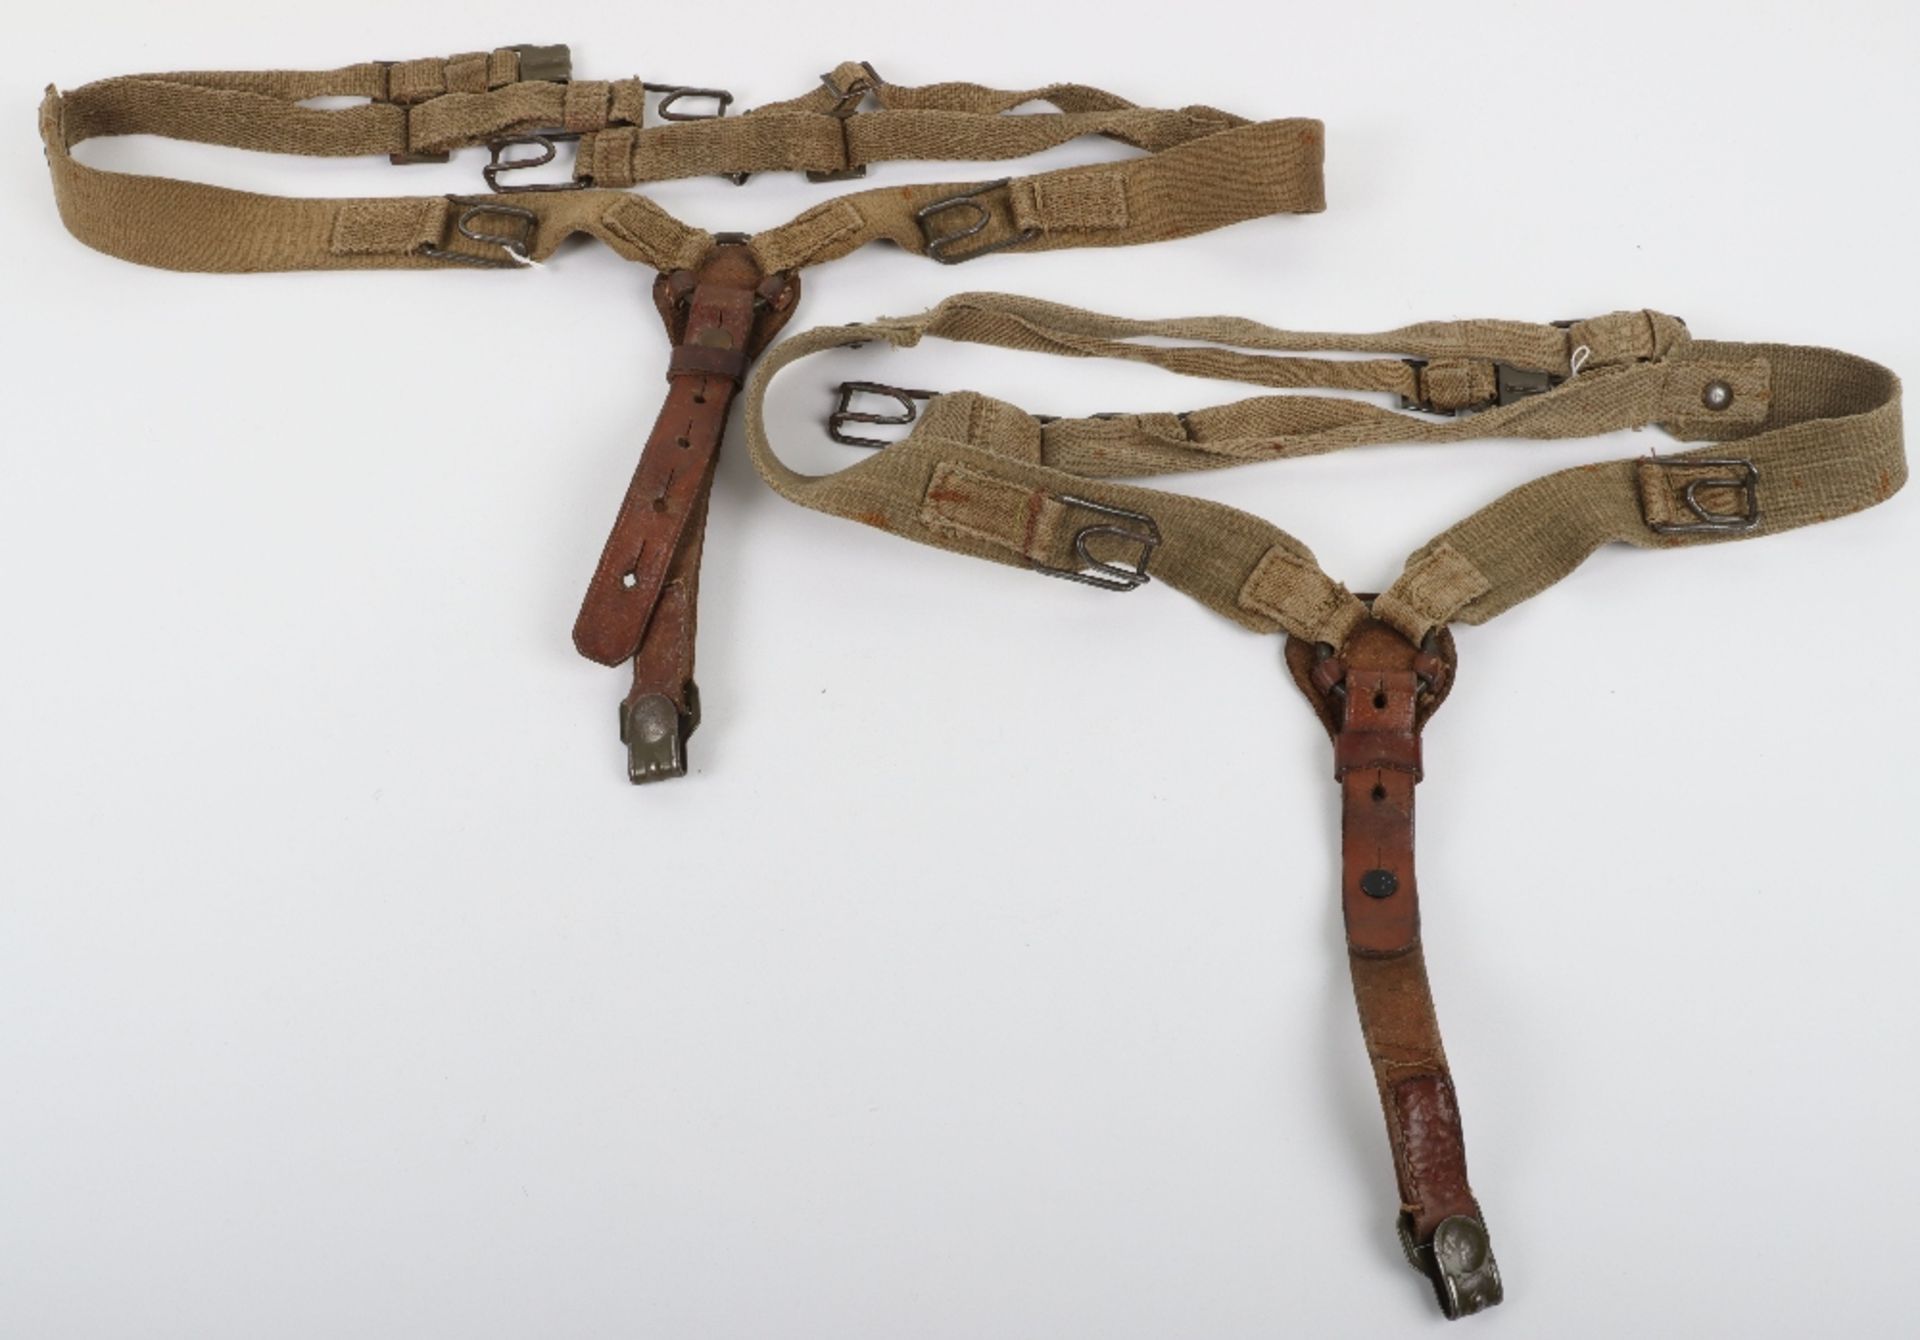 2x Pairs of Afrikakorps (D.A.K) Style Equipment “Y” Straps